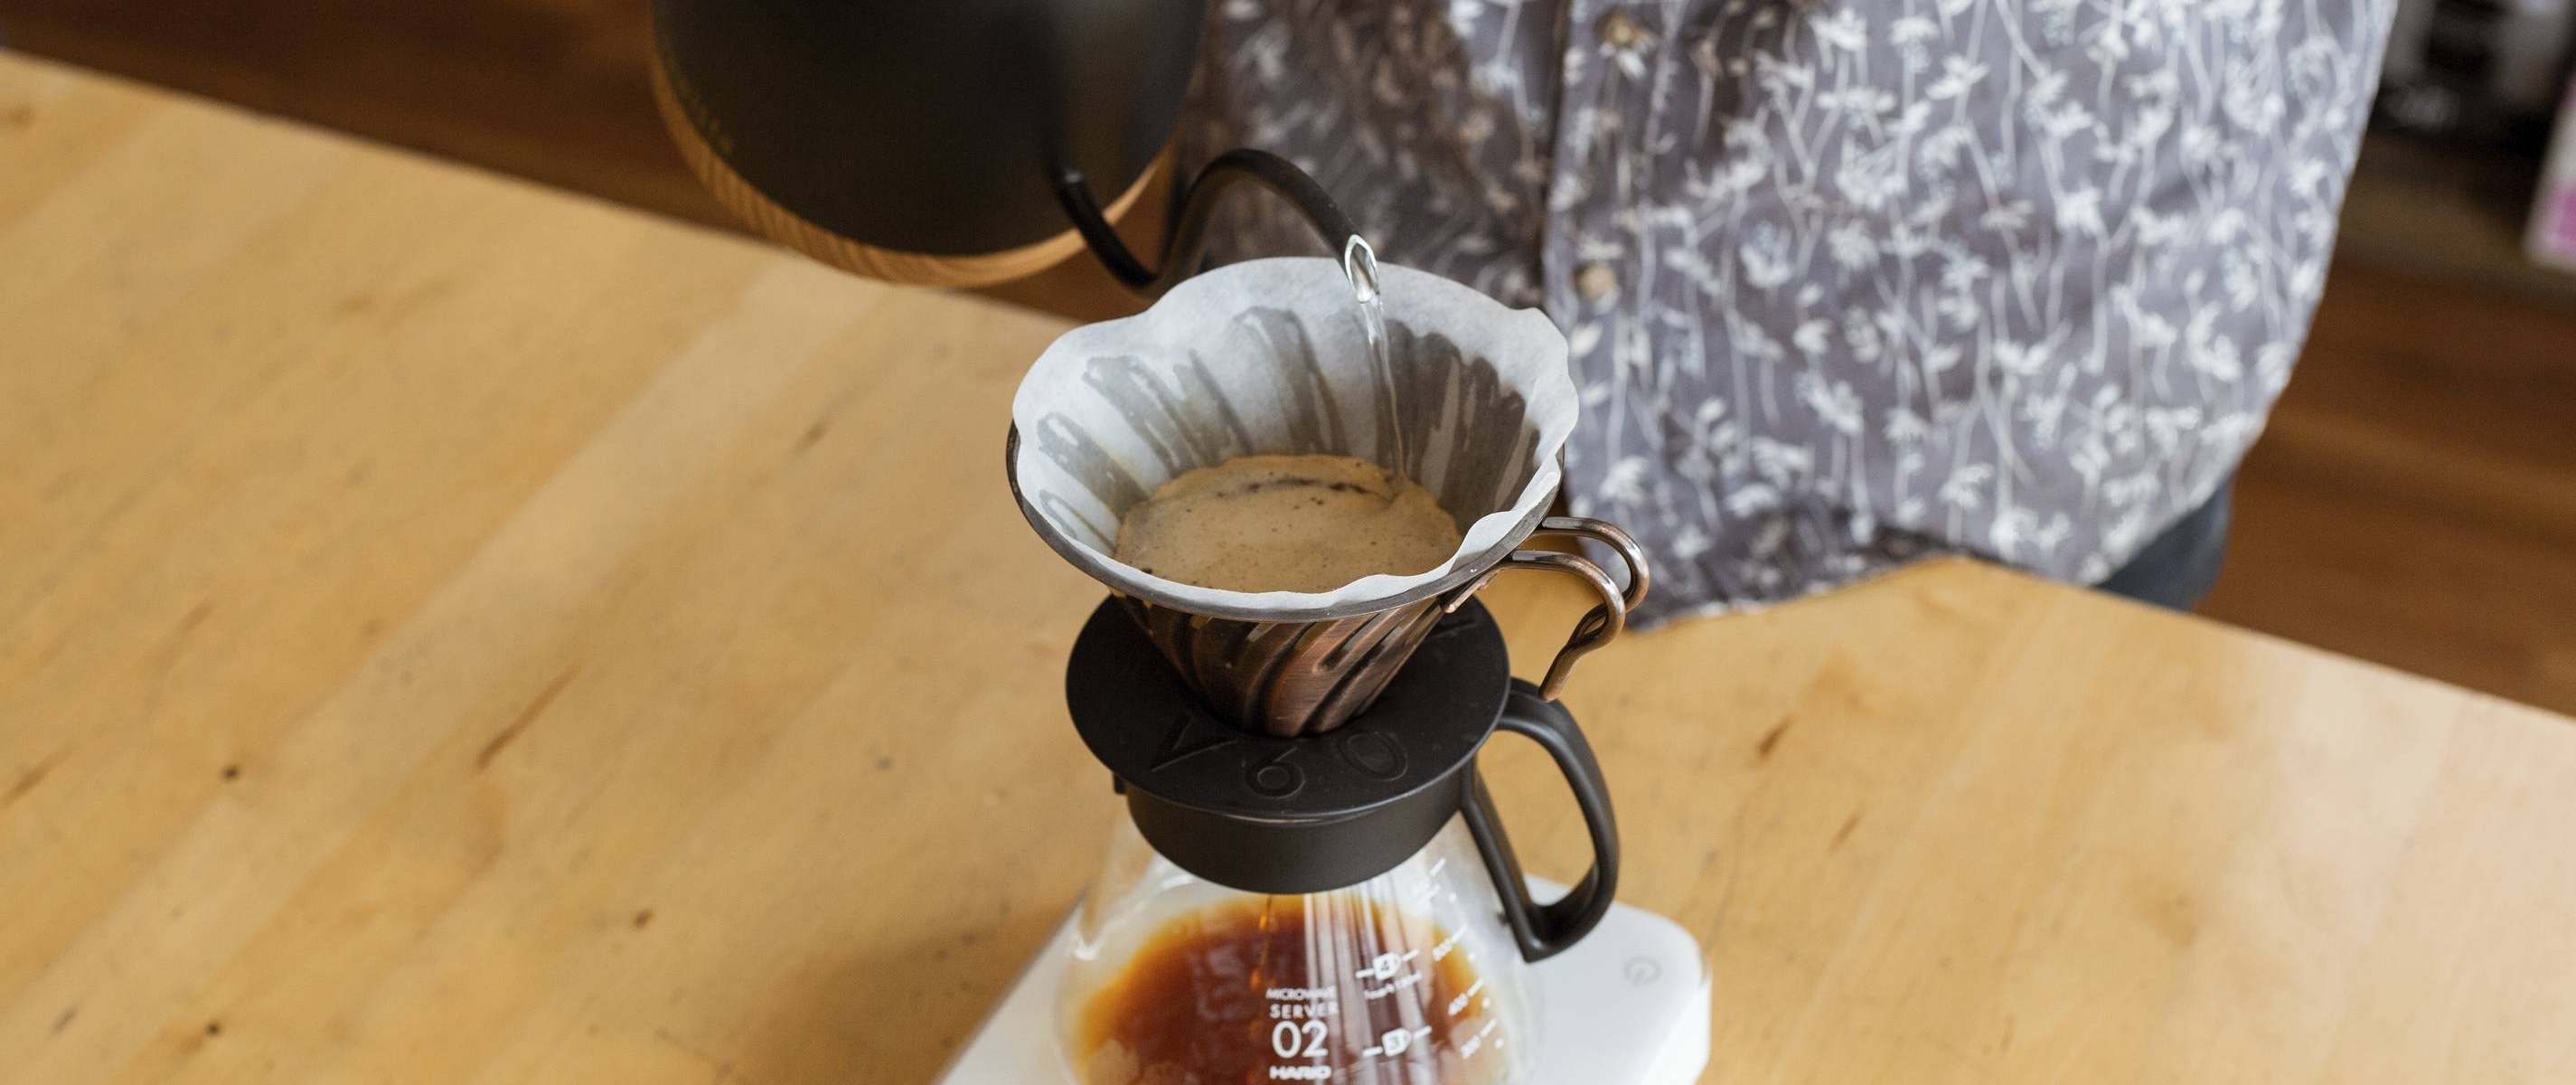 https://gothammag.com/get/files/image/galleries/Make-the-Perfect-Cup-of-Coffee-Every-Time-Everywhere-With-These-6-Tools-and-Gadgets_Thumb.jpg